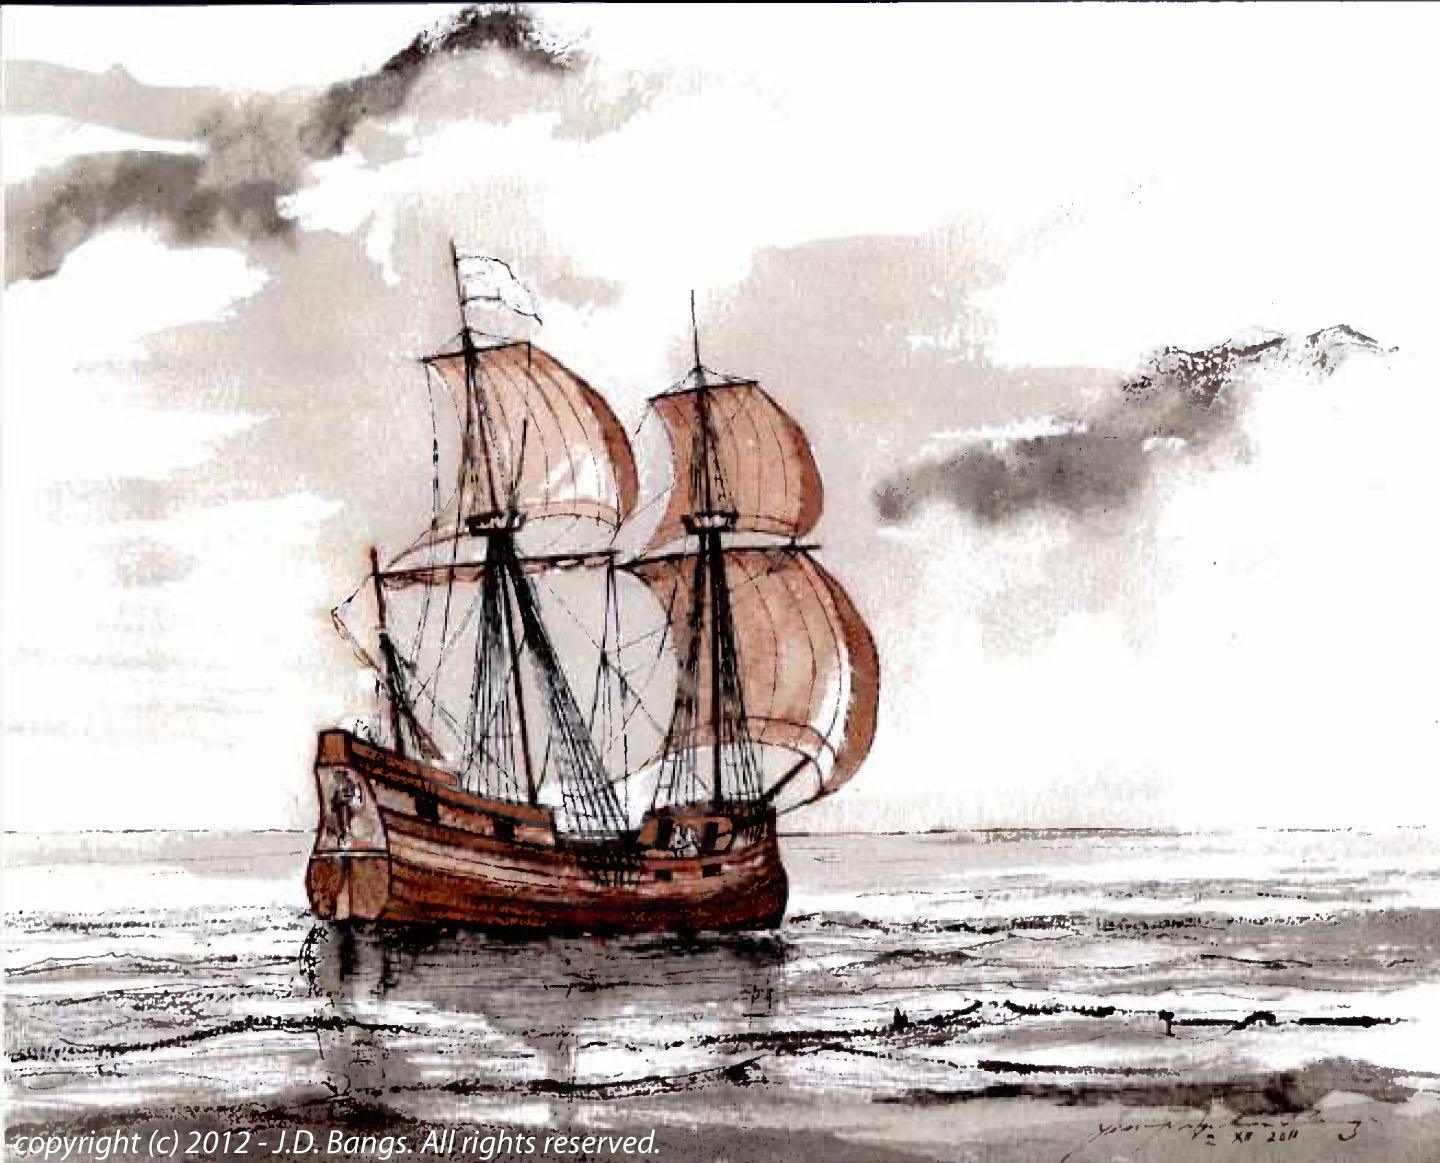 The ship "FORTUNE"